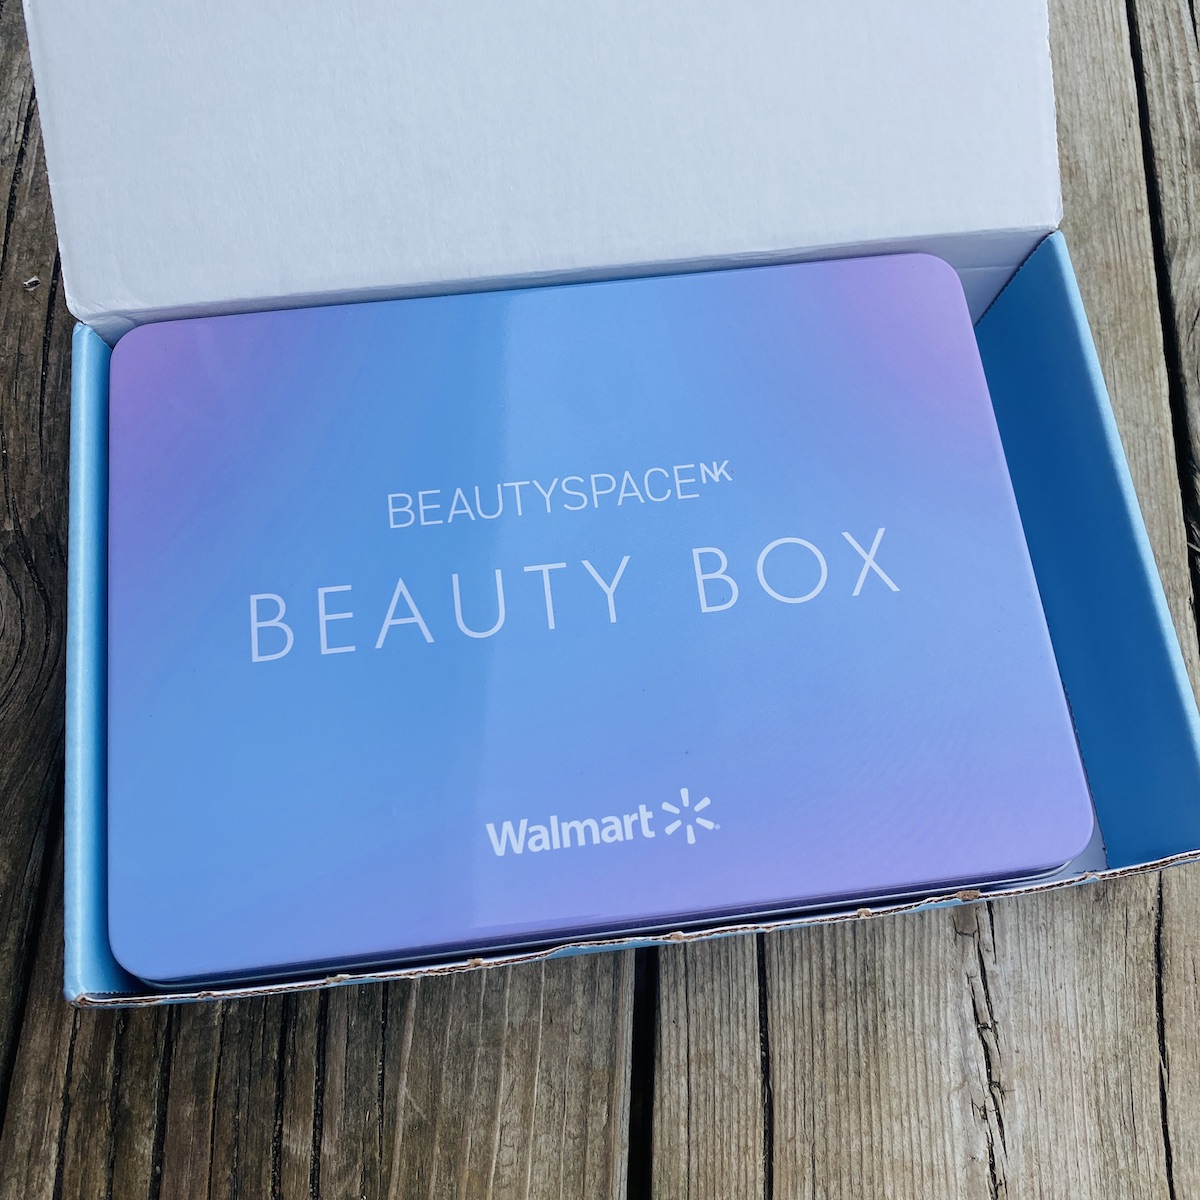 First Look: The Ultimate Beauty Gift from SpaceNK - The Beauty